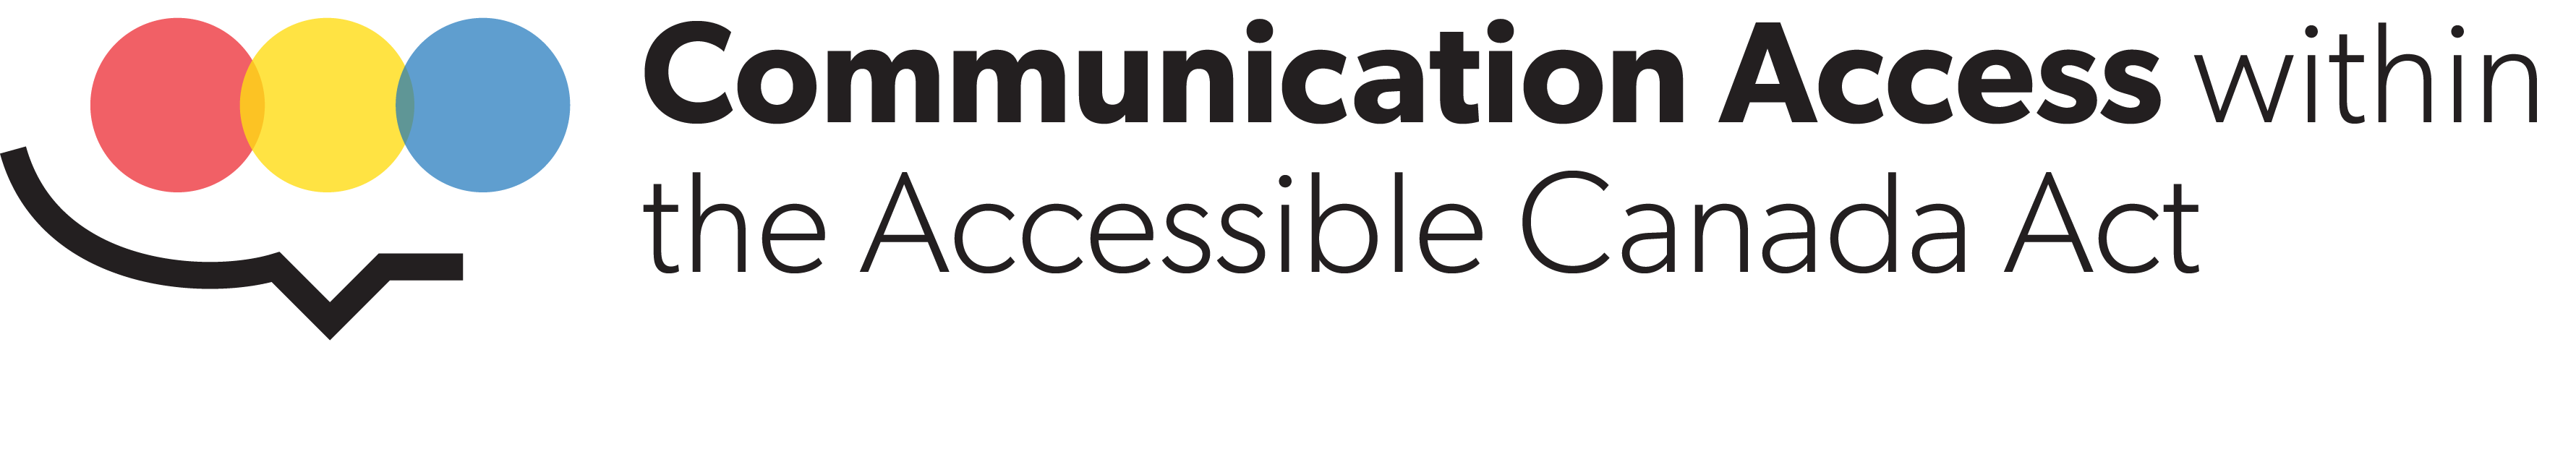 Communication Access within the Accessible Canada Act logo